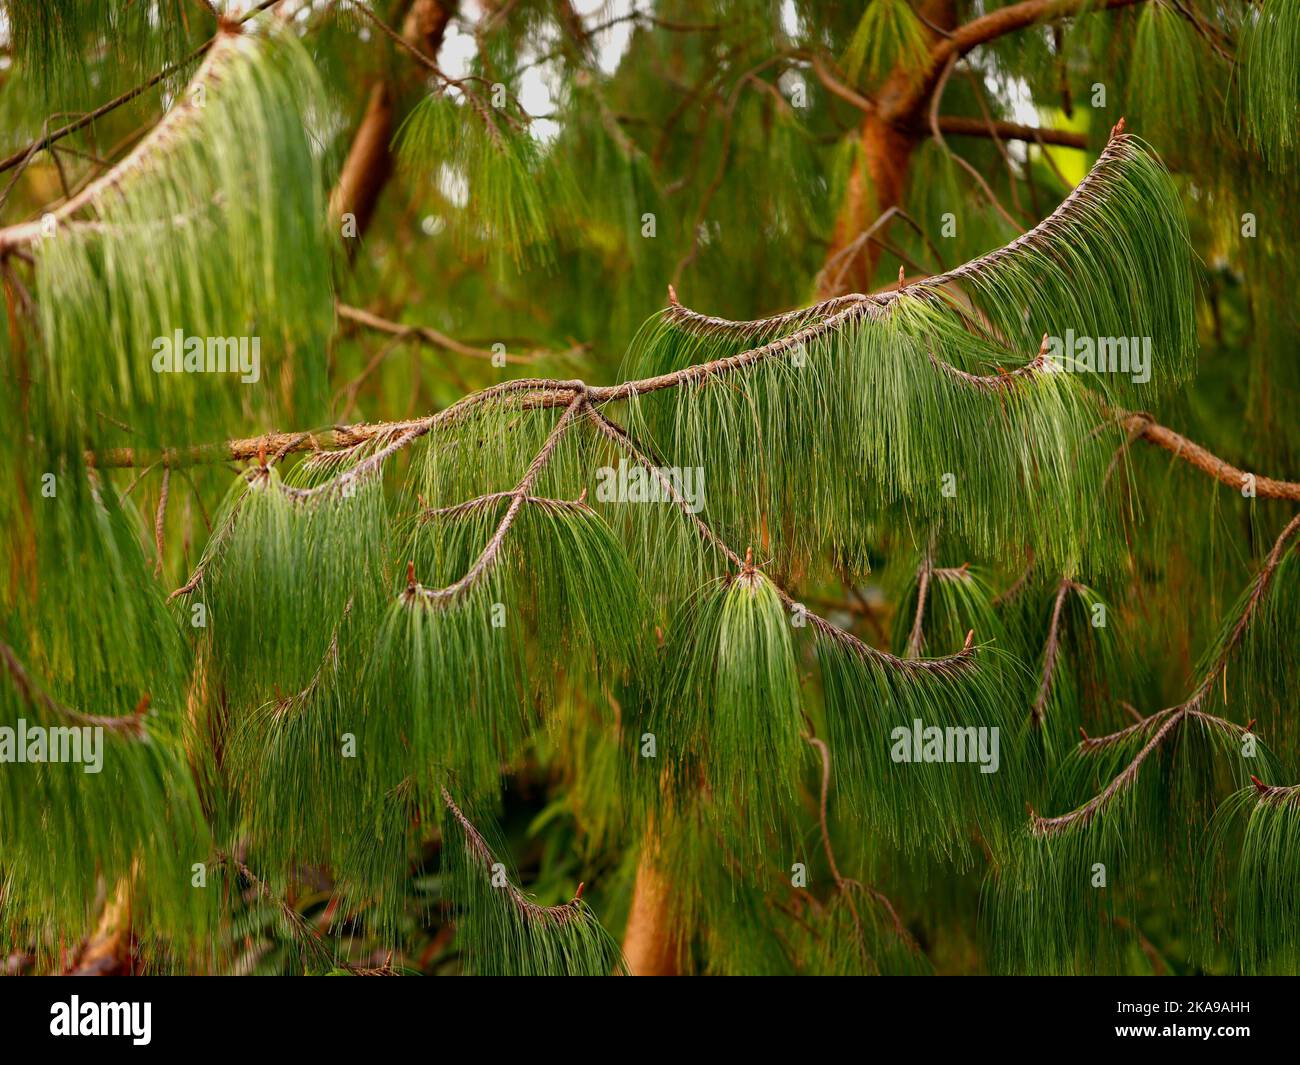 Close up of the green trailing pine needles of the evergreen garden tree Pinus patula. Stock Photo